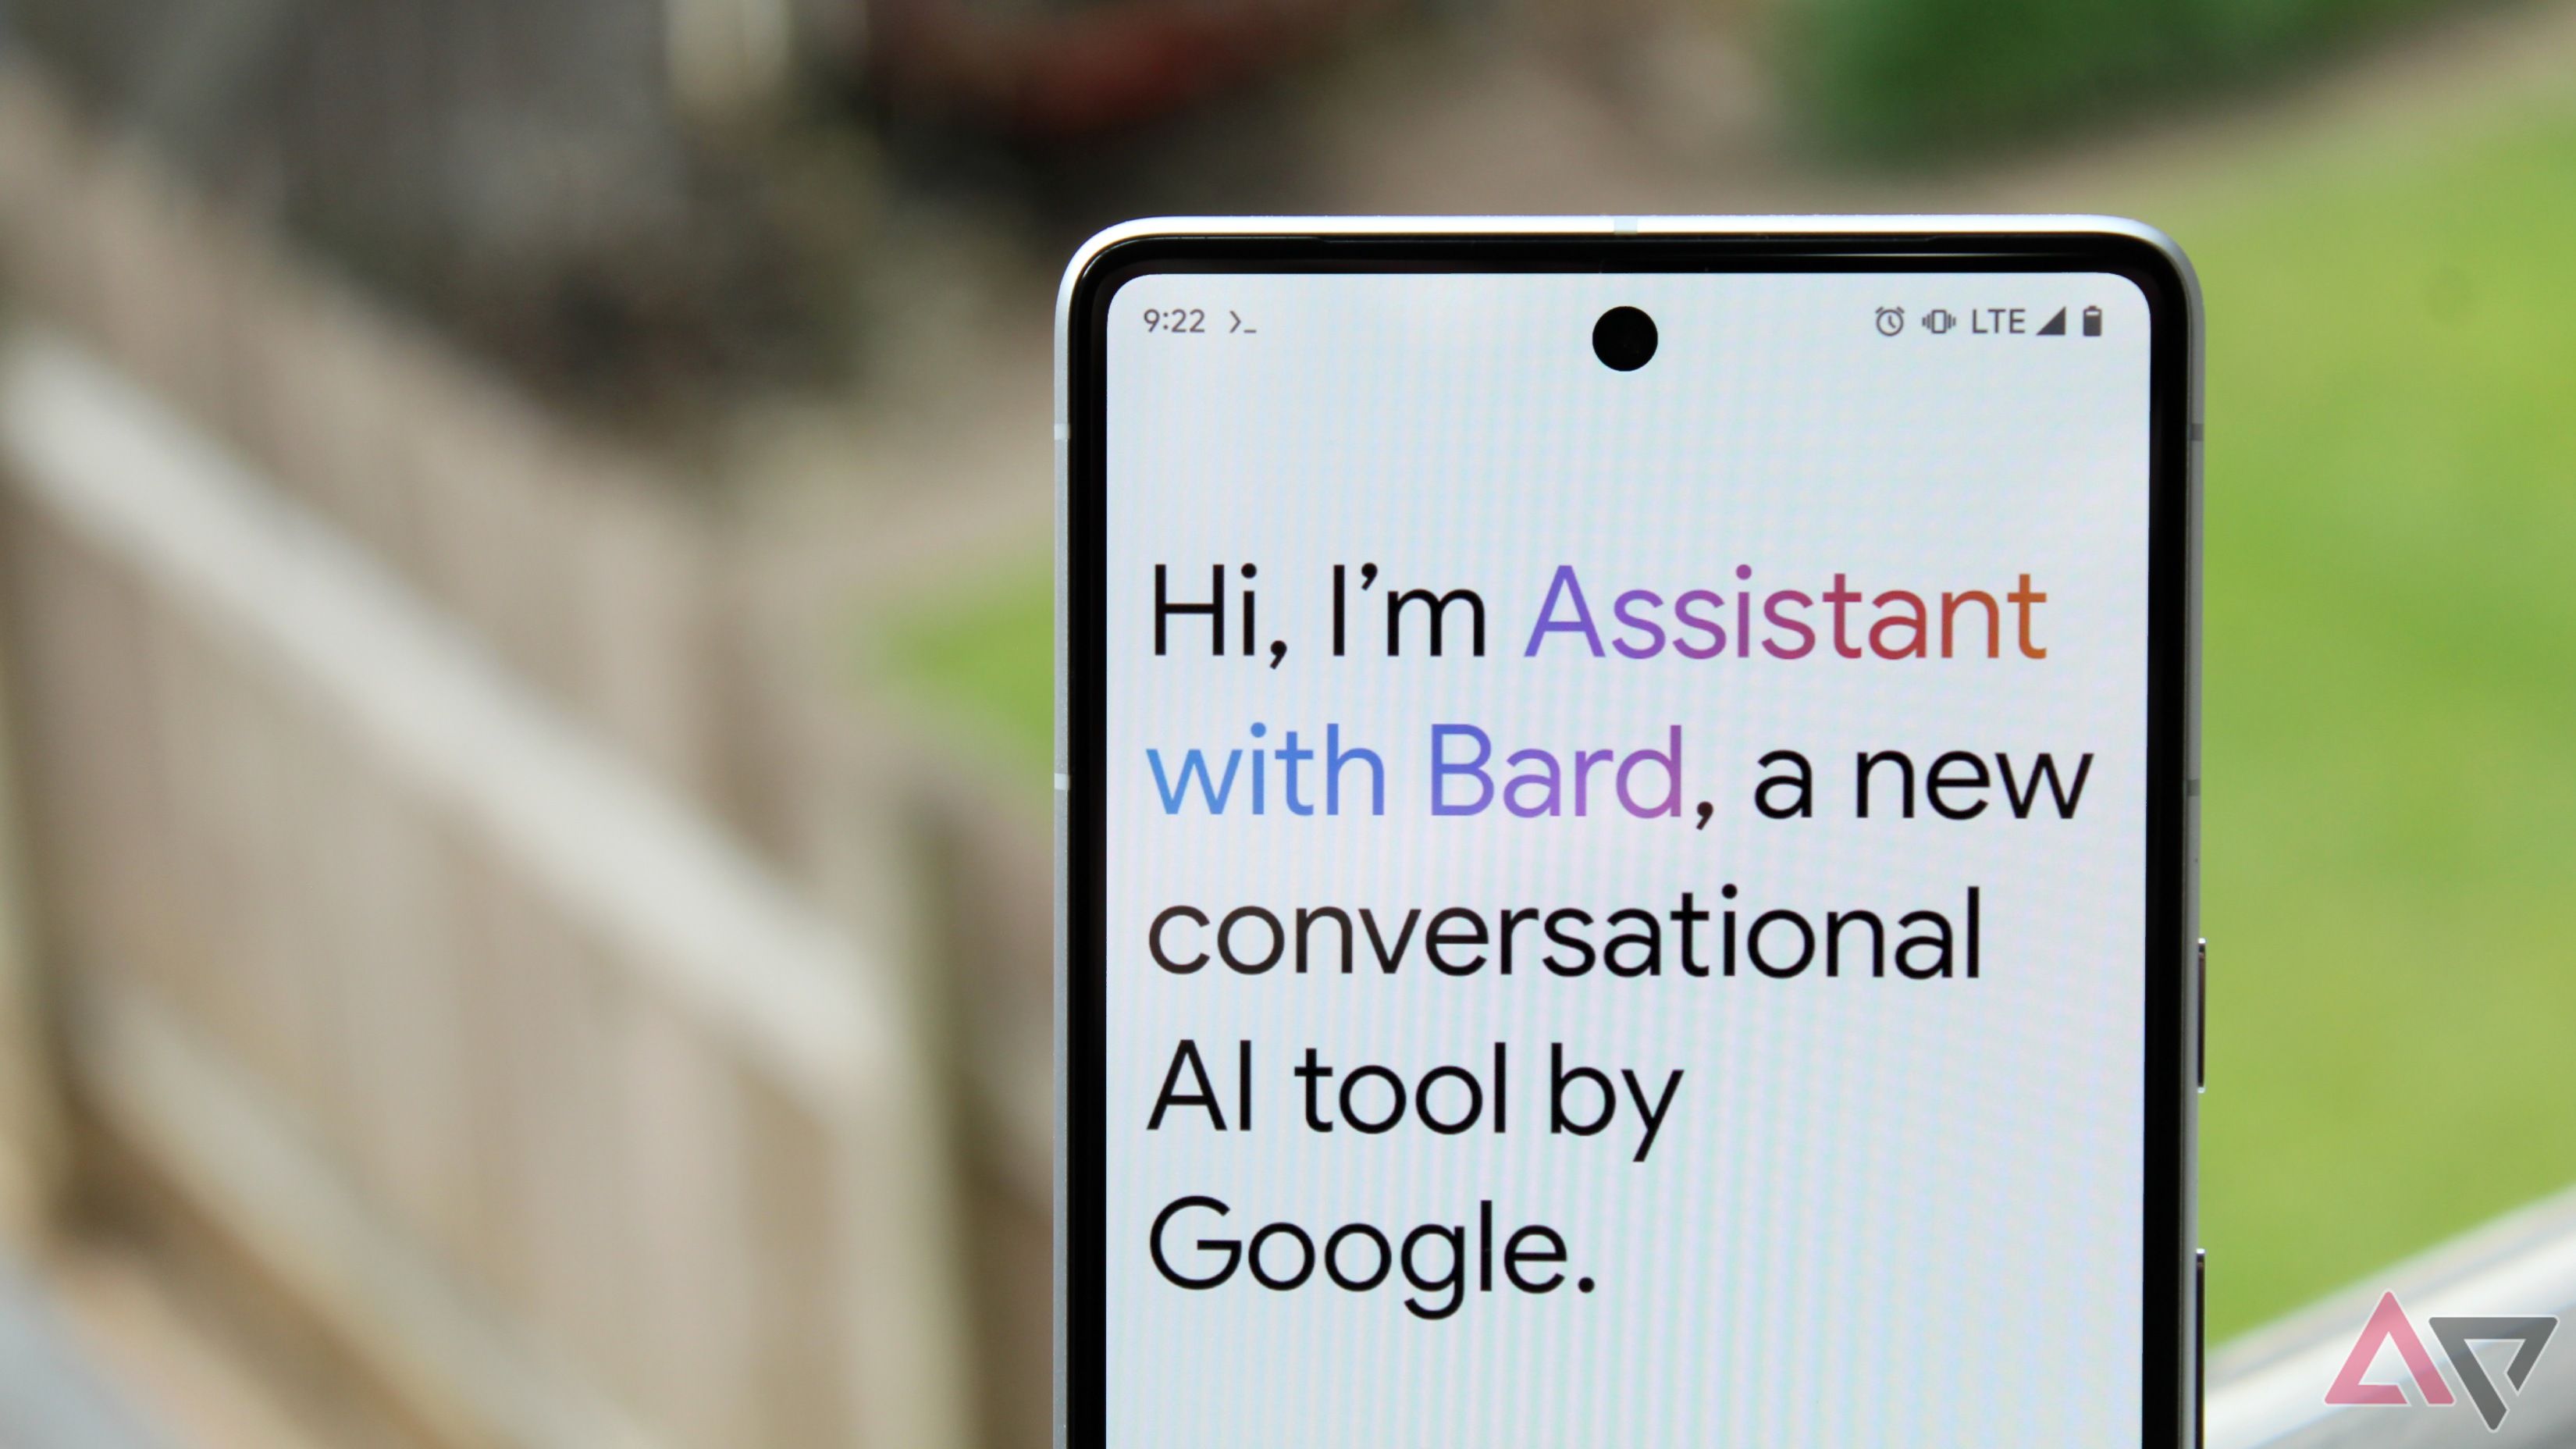 Google Assistant With Bard Puts an AI Chatbot in Your iPhone or Android -  CNET